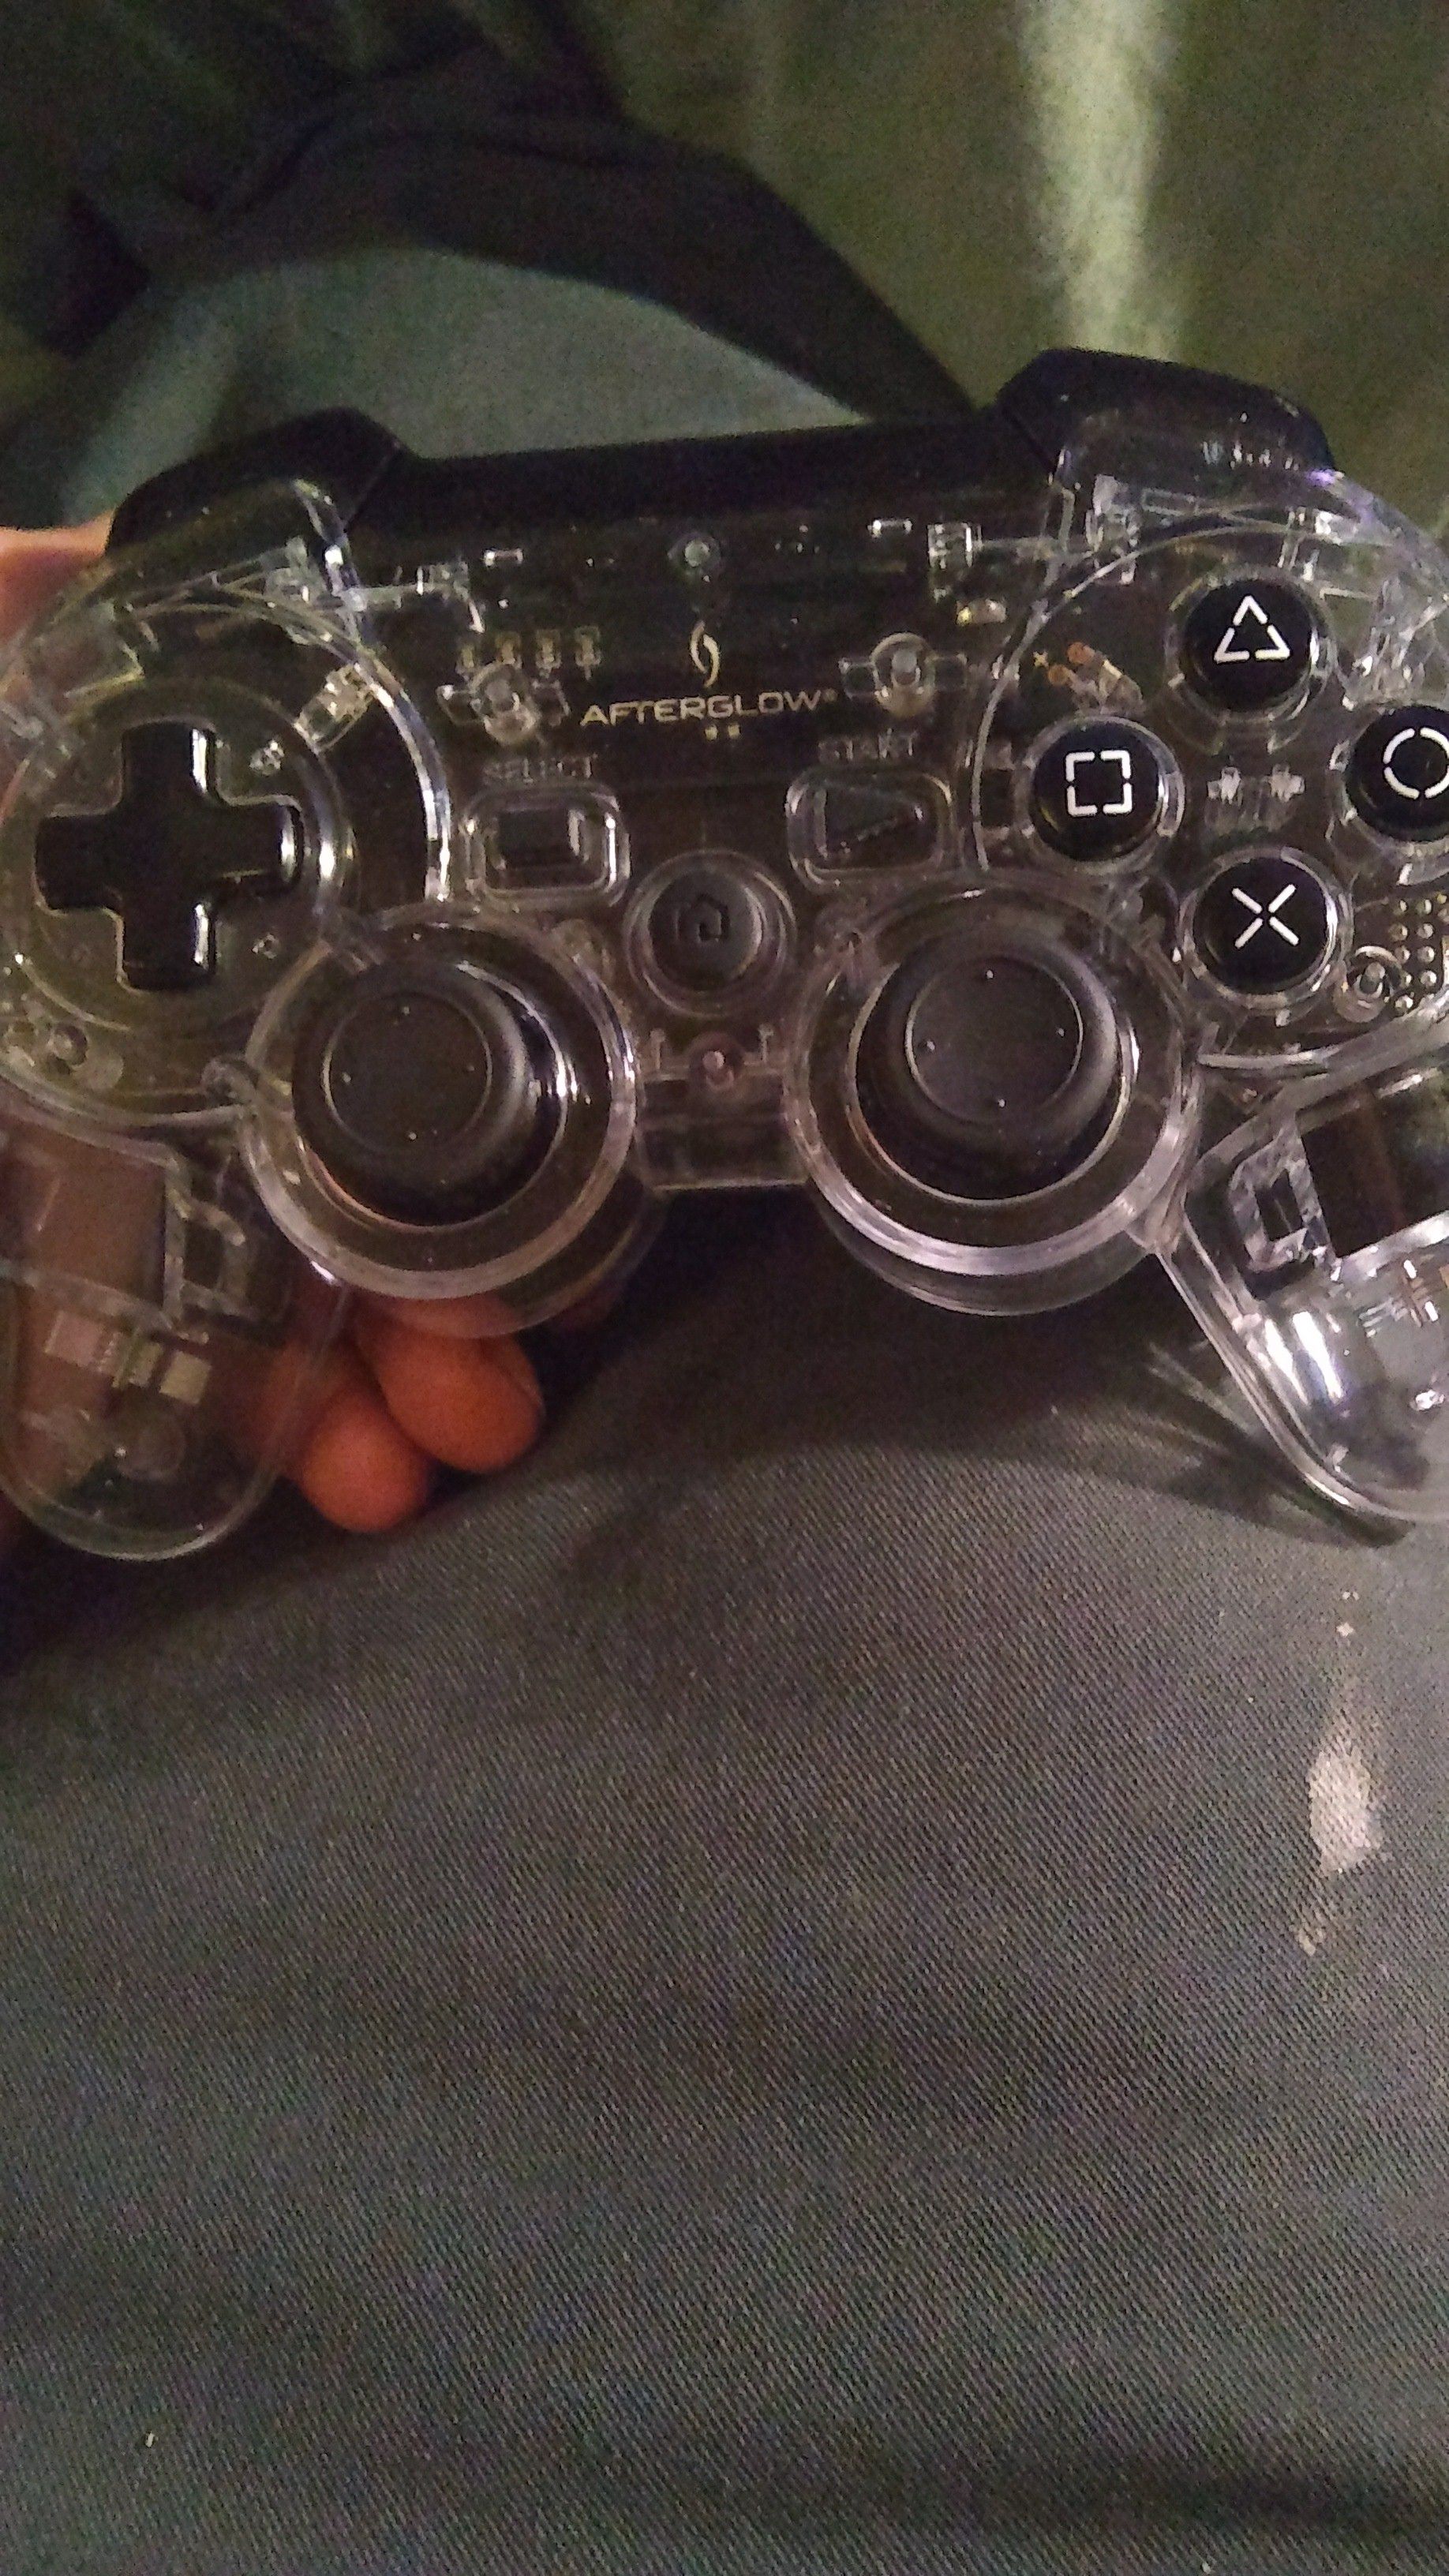 PS3 Afterglow control